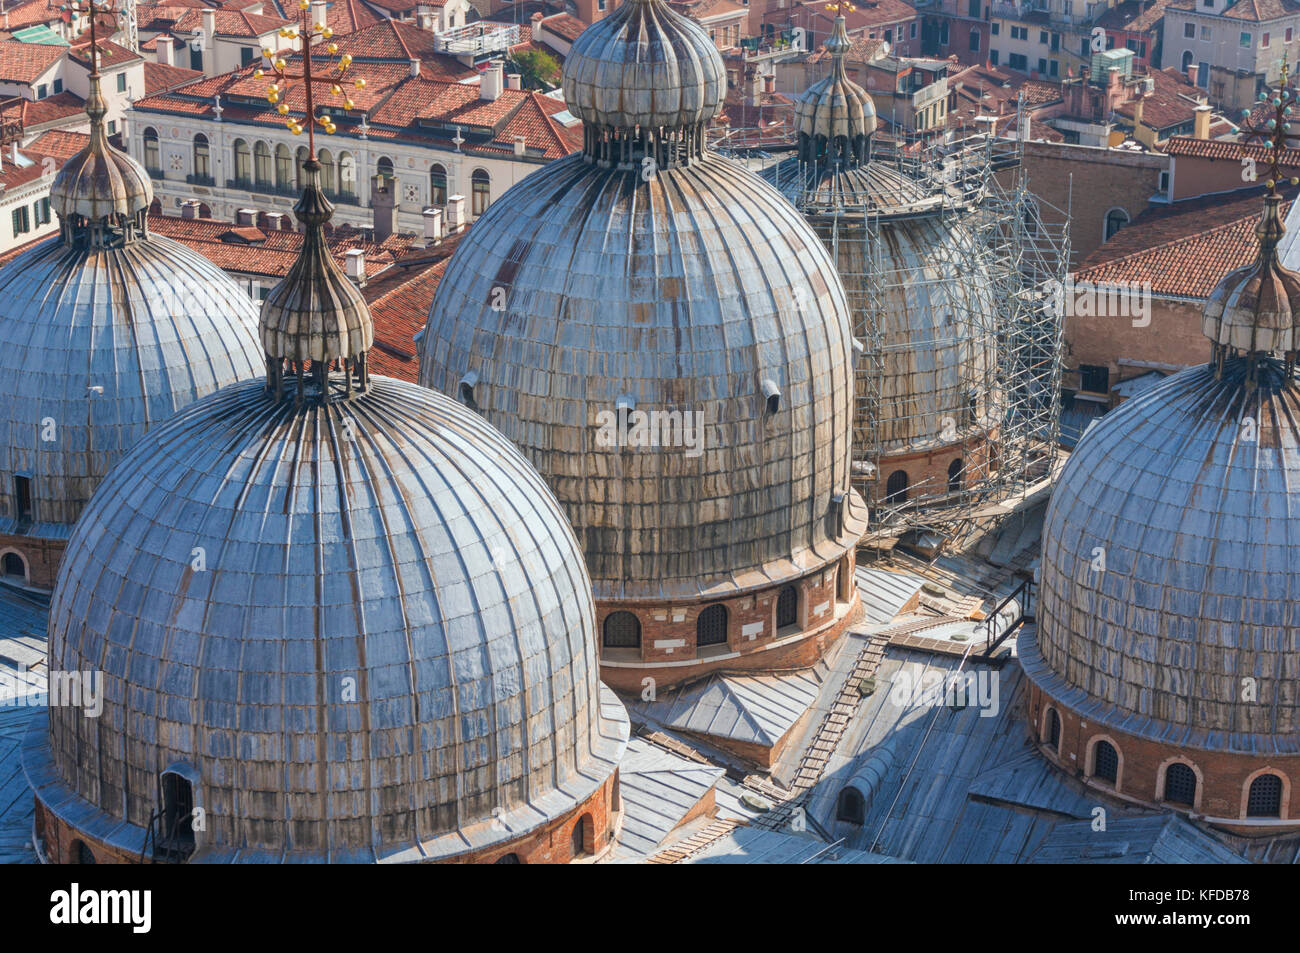 VENICE ITALY VENICE aerial view of Domes of the roof of Saint Mark's Basilica  Basilica di San Marco Piazza de San Marco Venice Italy EU Europe Stock Photo